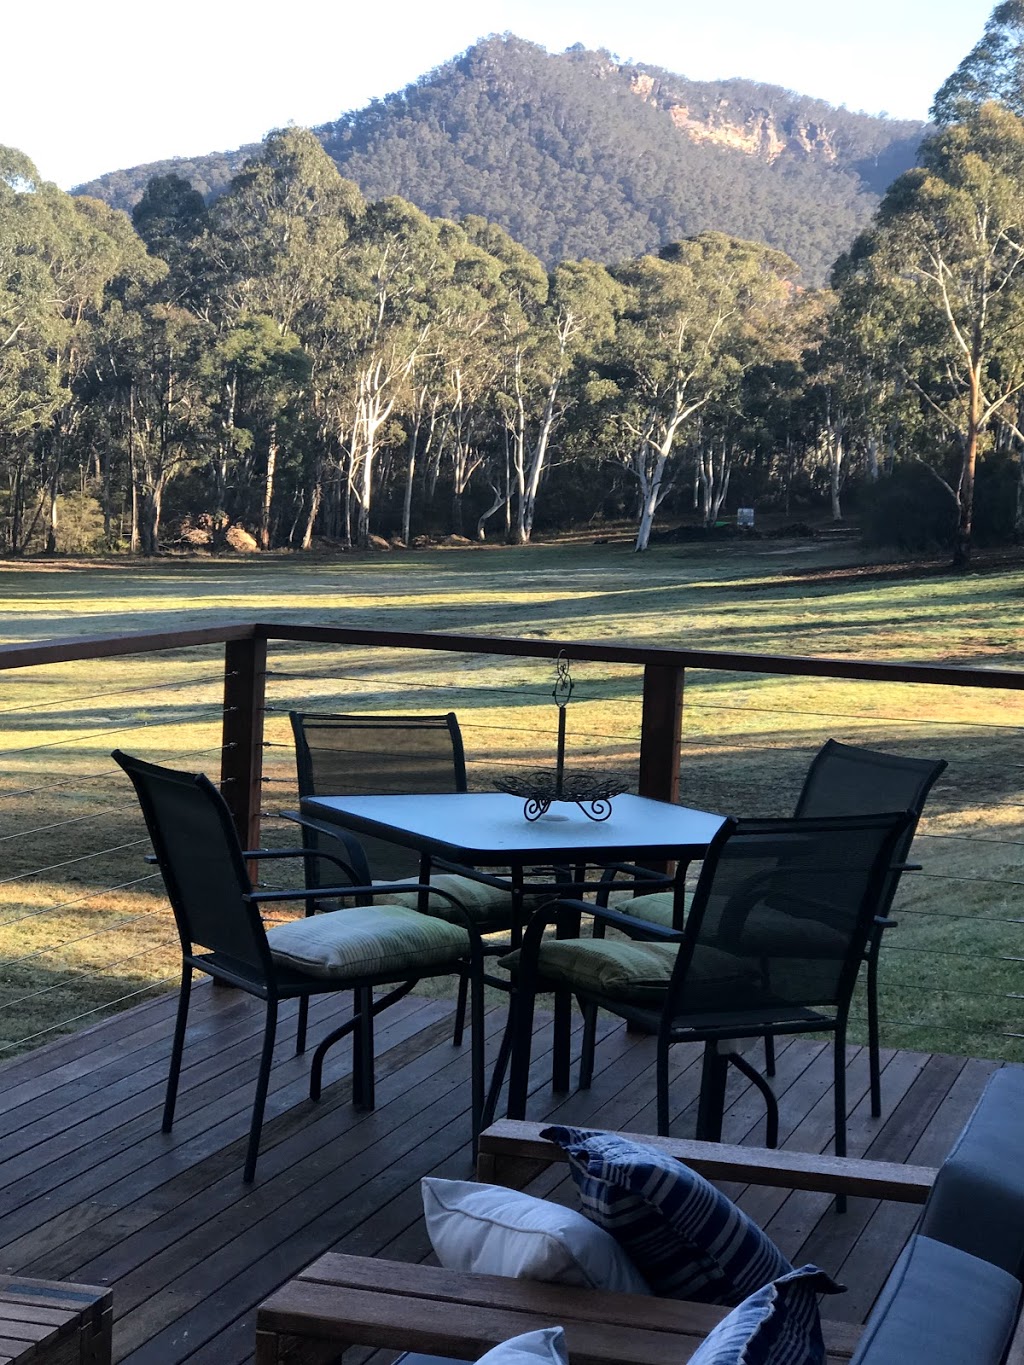 The Mill House | 853 860 Megalong Rd, Megalong Valley NSW 2785, Australia